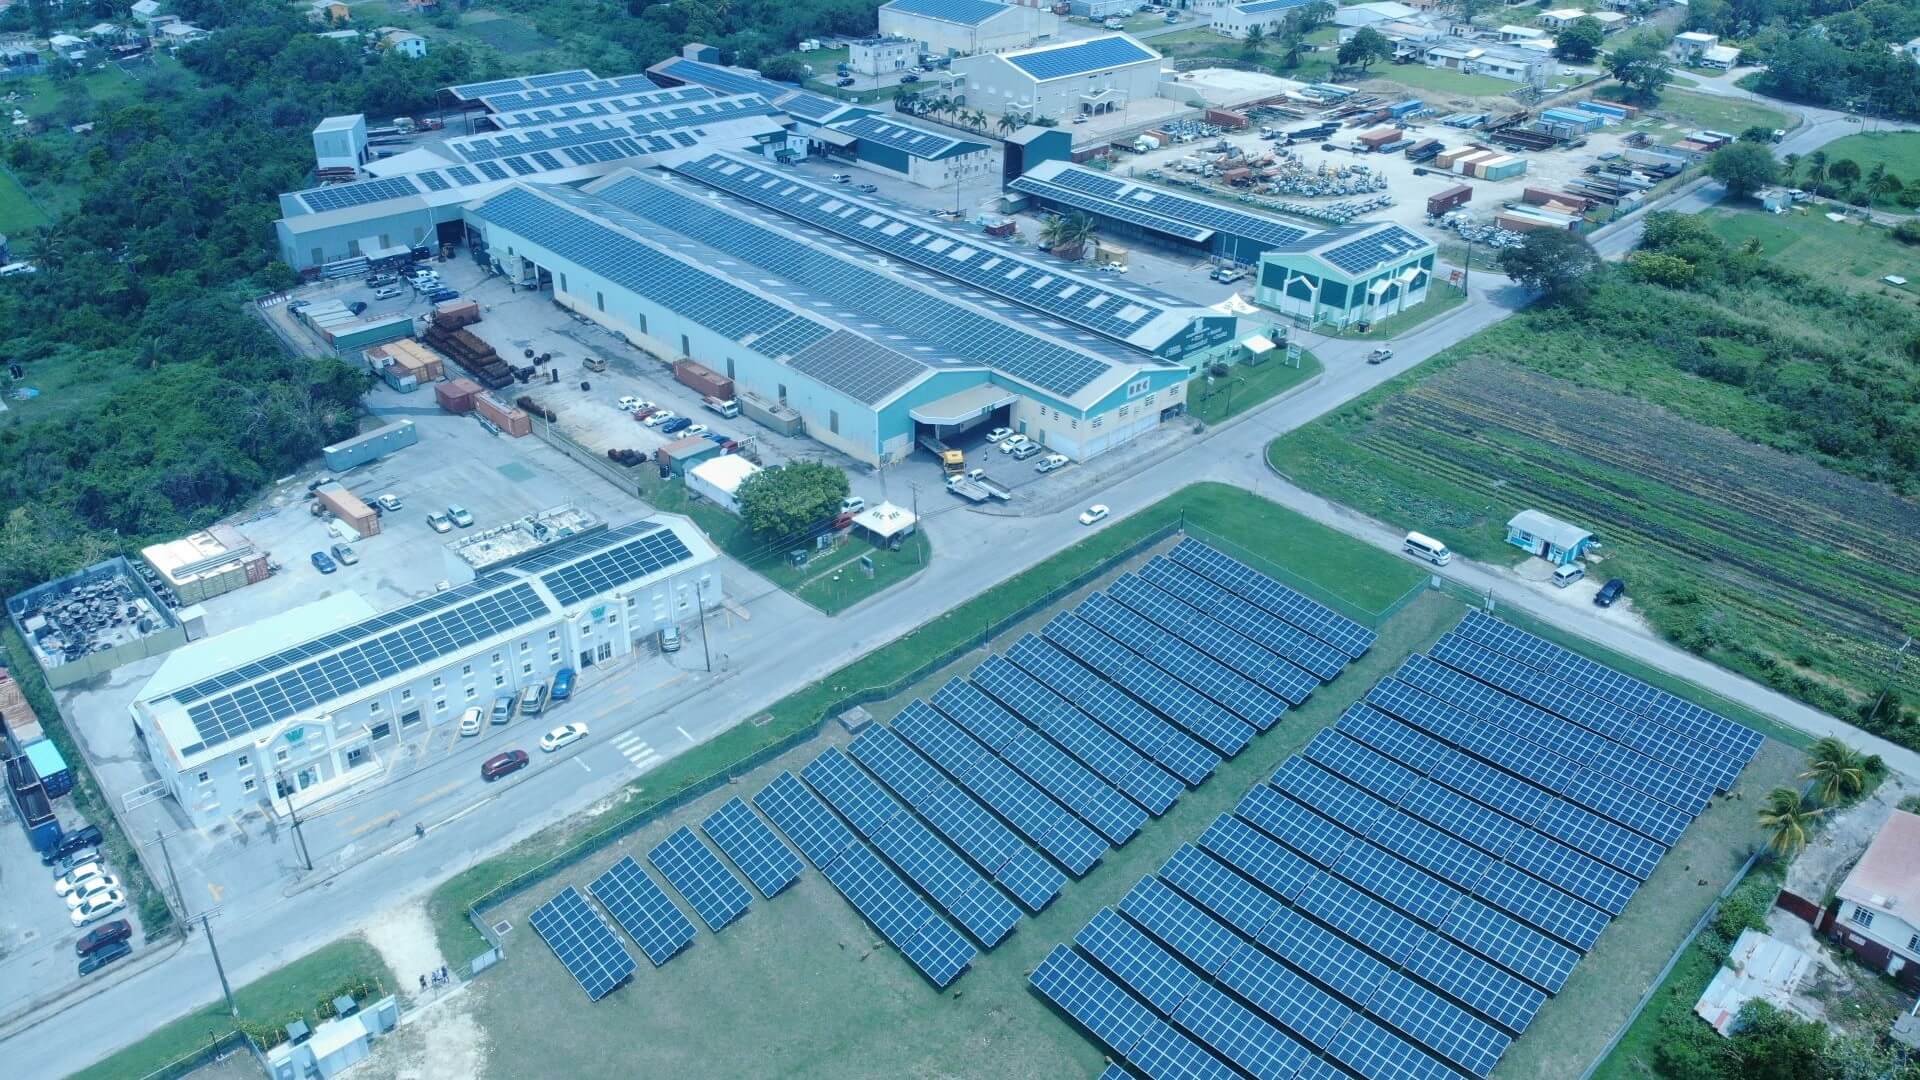 Aerial view showing solar panels in action at Williams Industries head office in Cane Garden, St Thomas